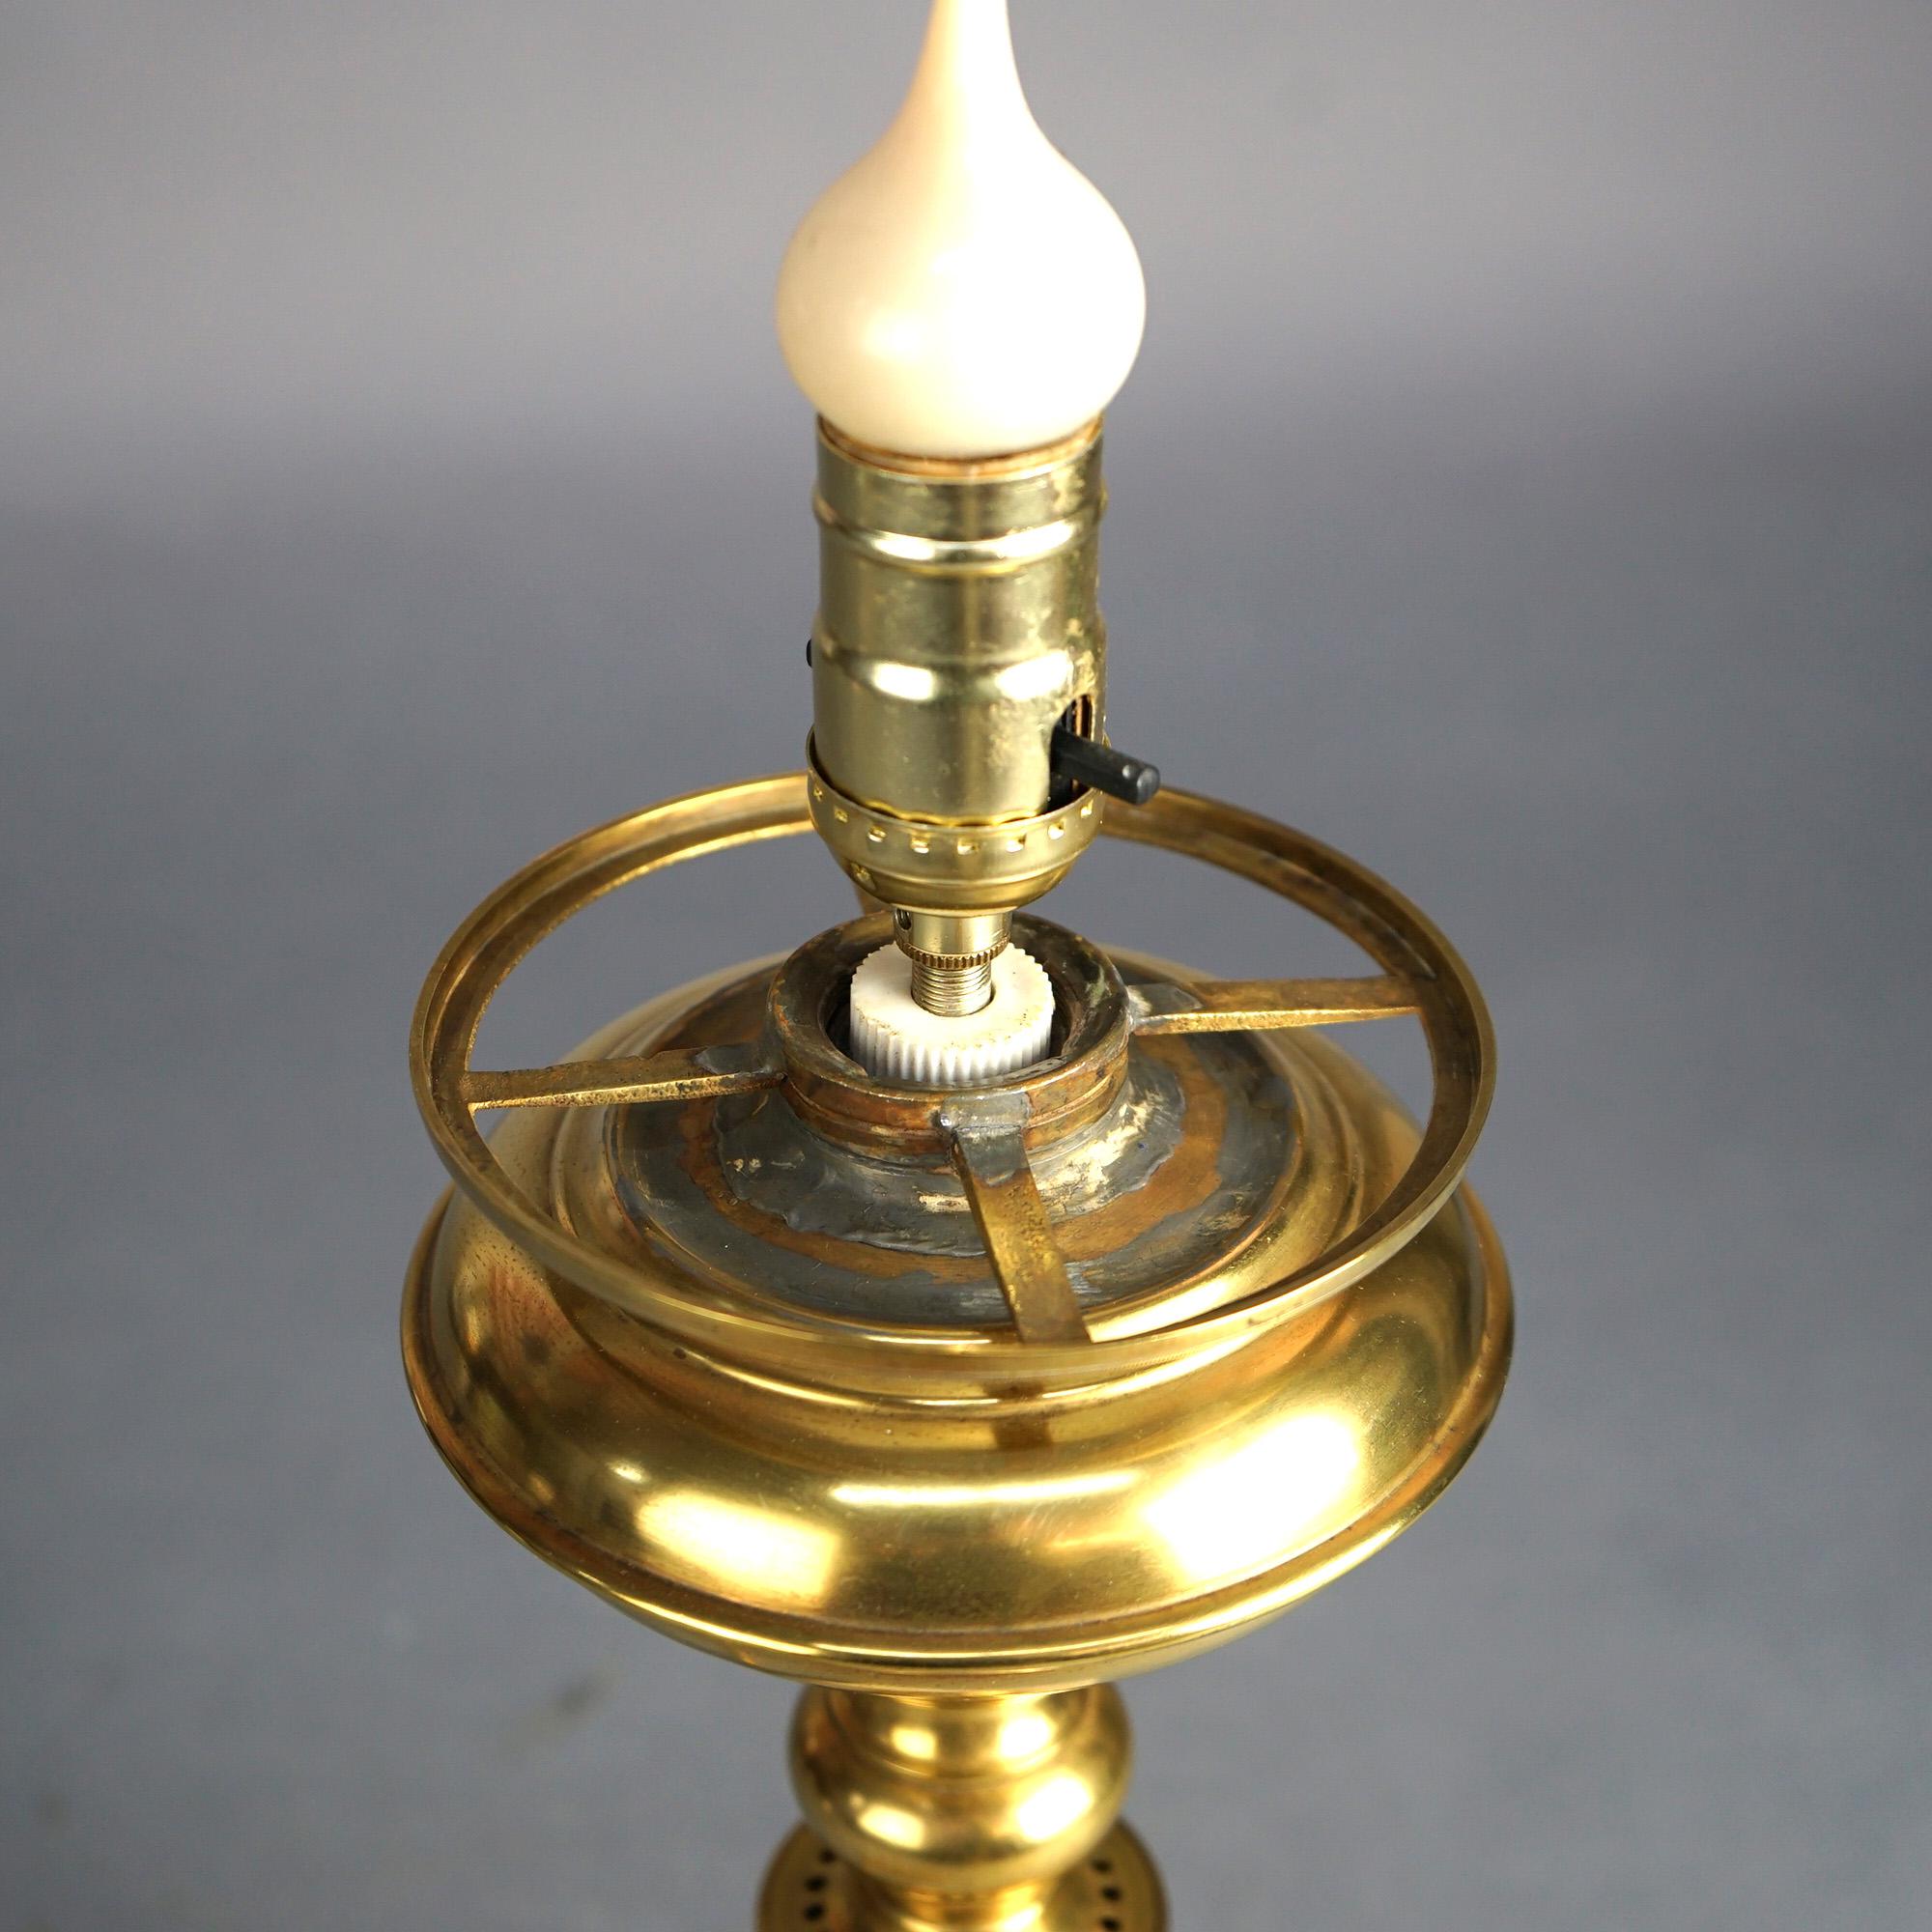 Antique Brass Solar Lamp with Tam-O-Shanter Cut Glass Shade & Marble Base C1840 For Sale 5